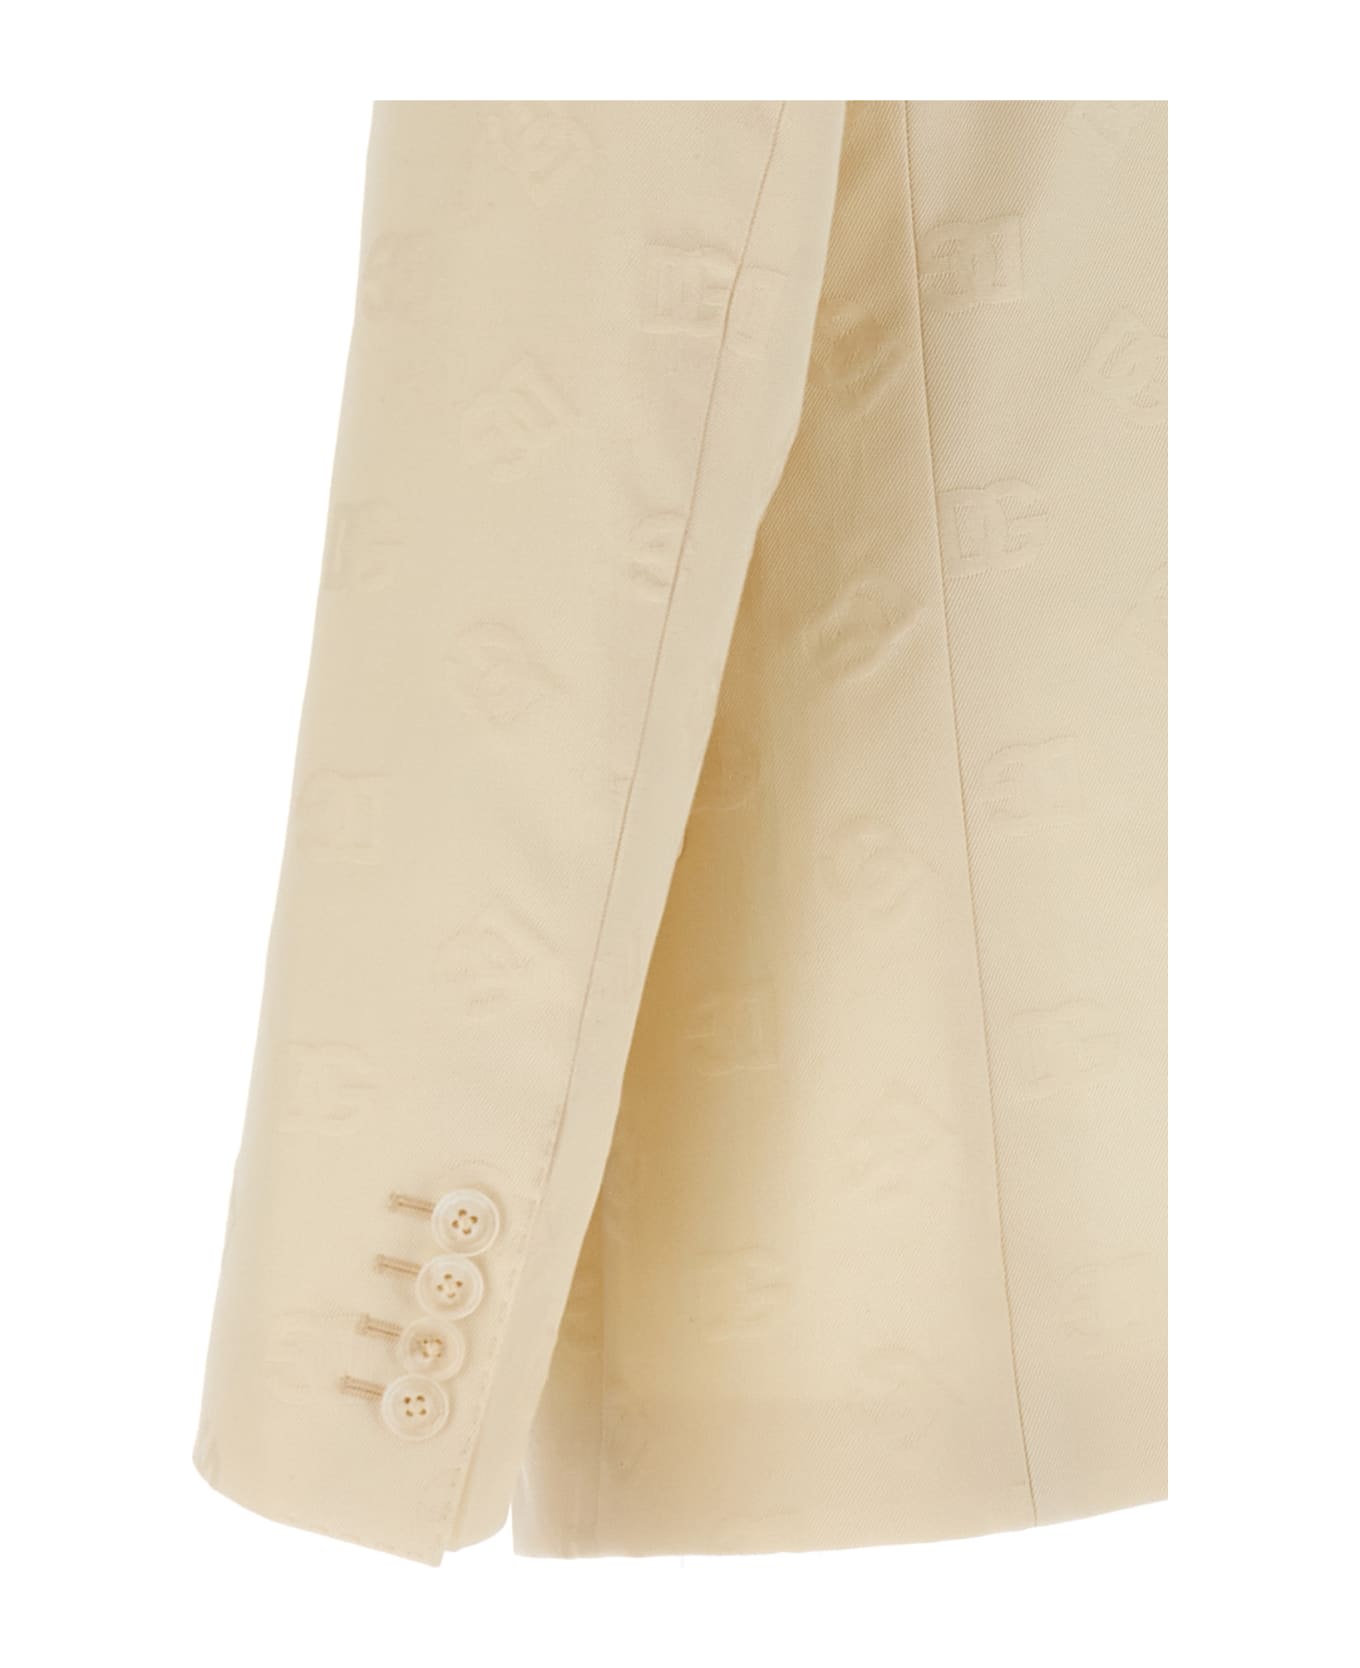 Dolce & Gabbana Single-breasted Blazer With Jacquard Logo All-over - Beige